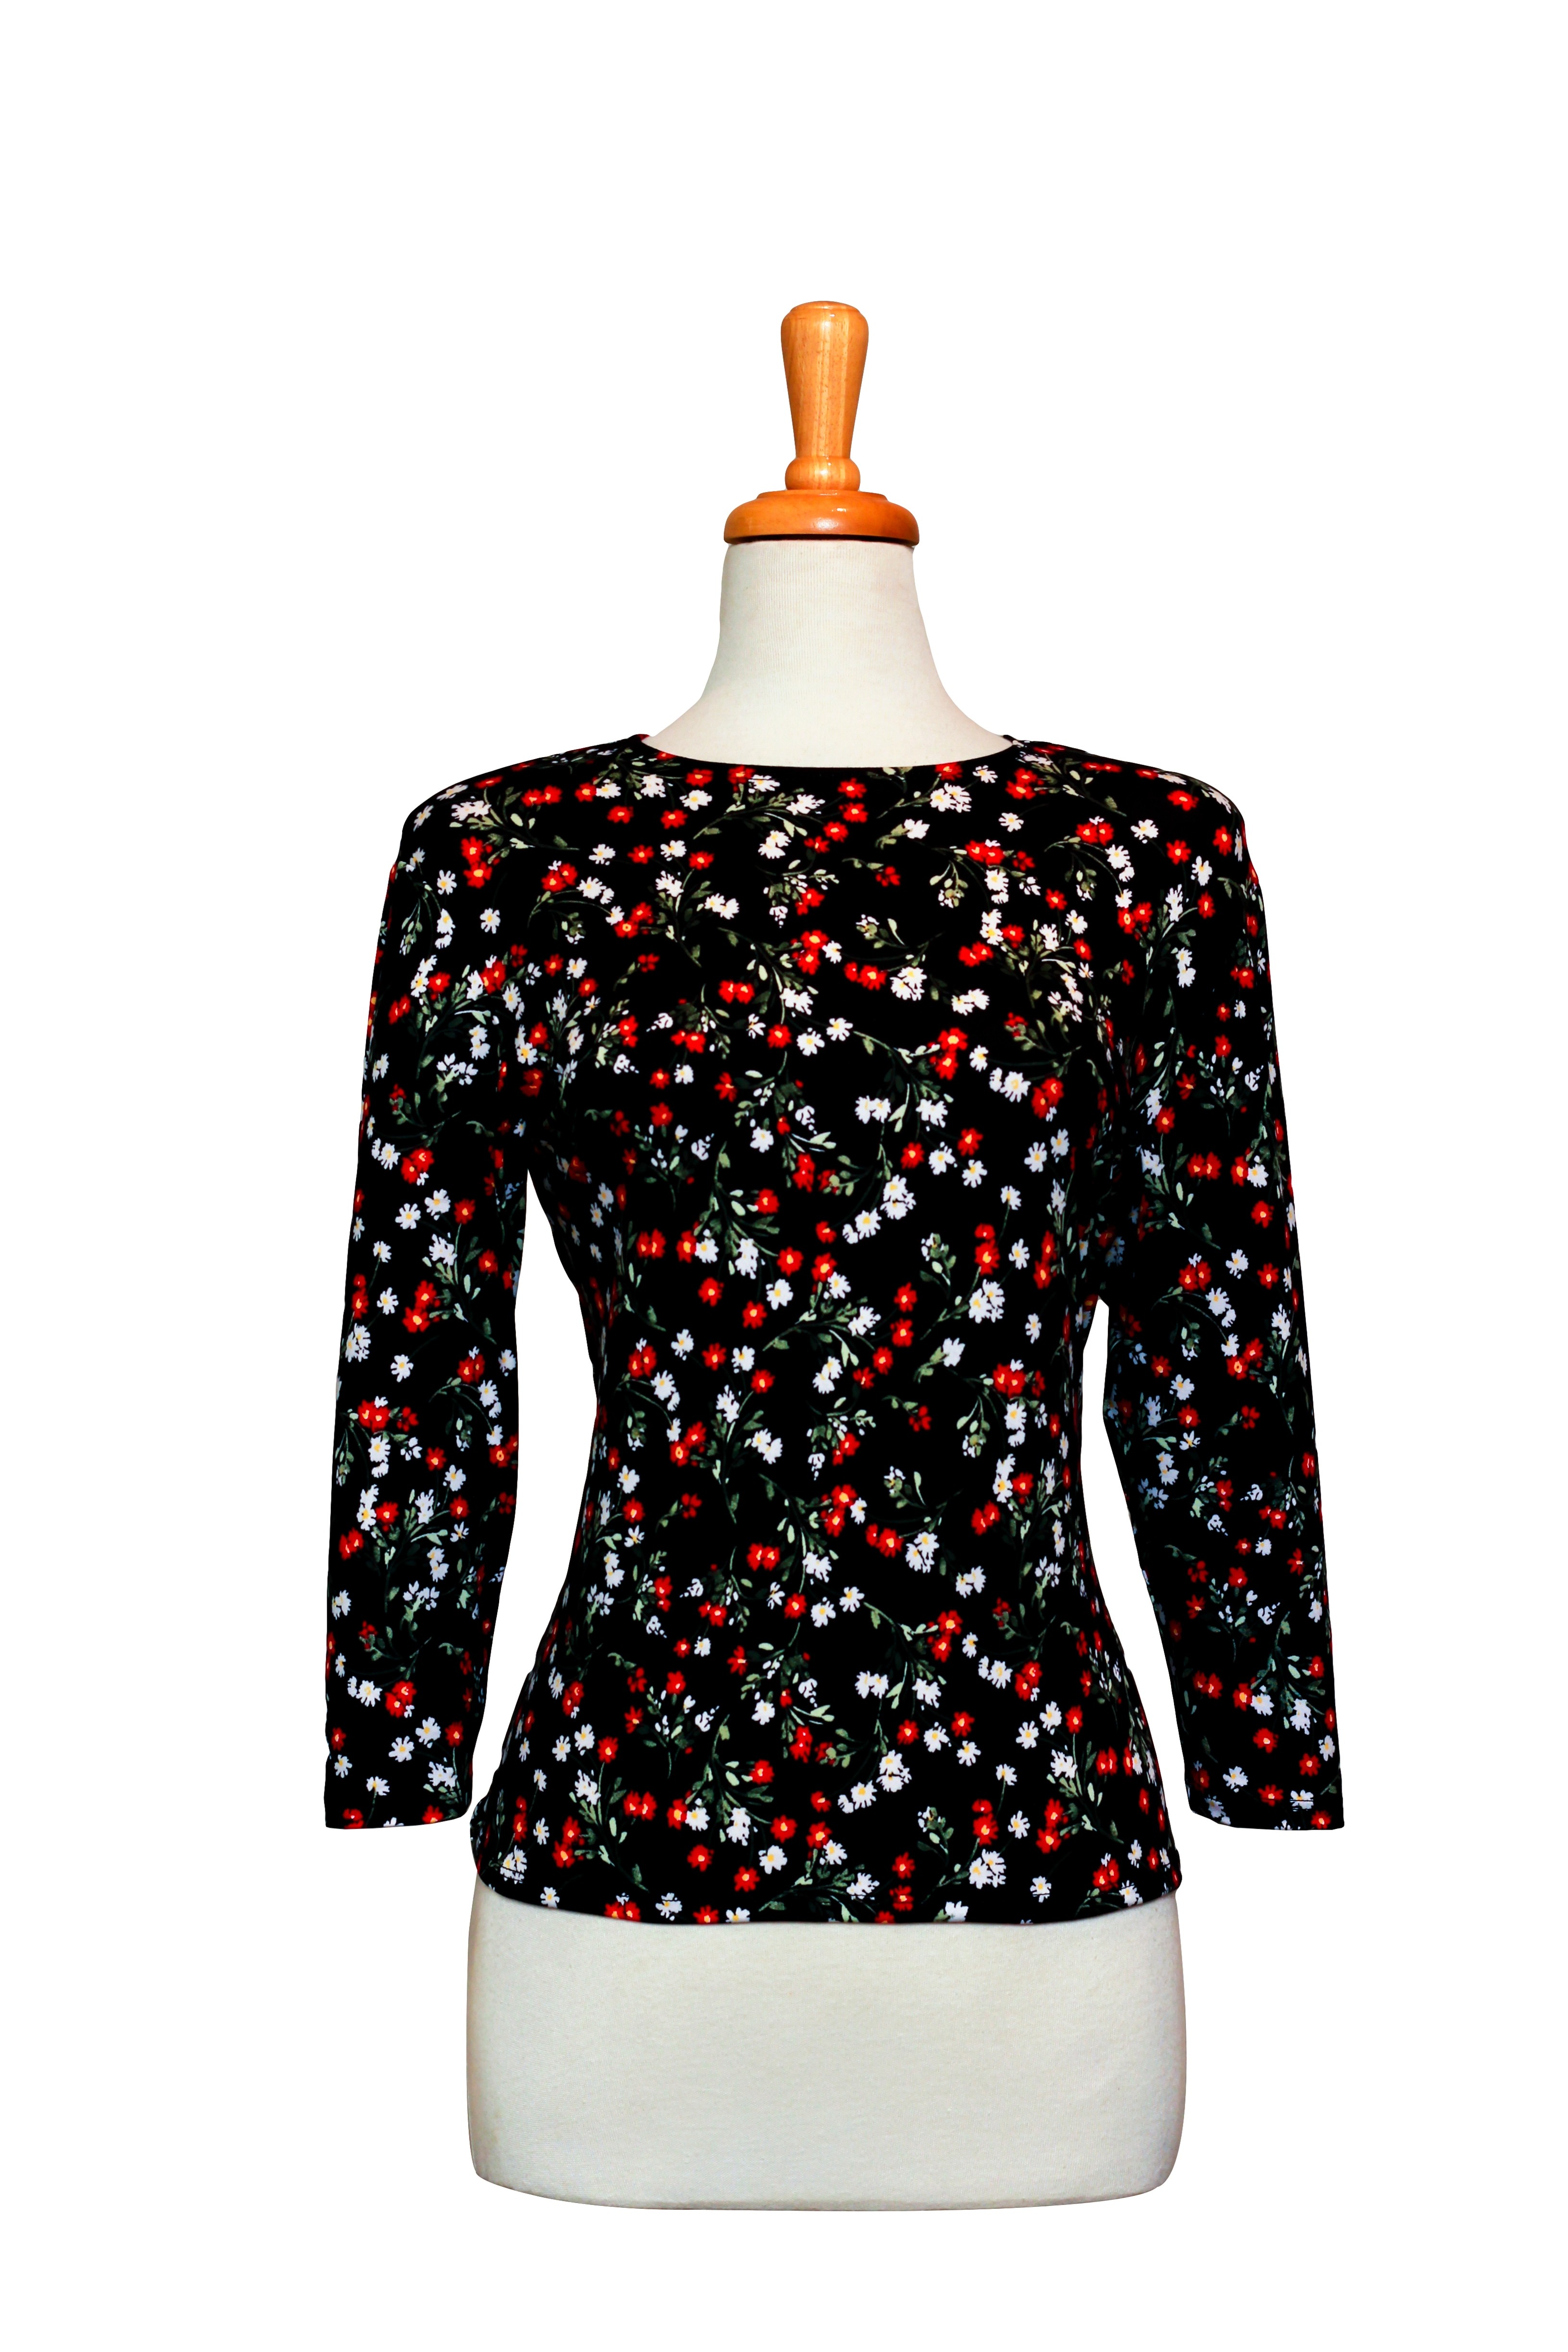 Black Red and White Mini Floral Cotton 3/4 Sleeve Top 